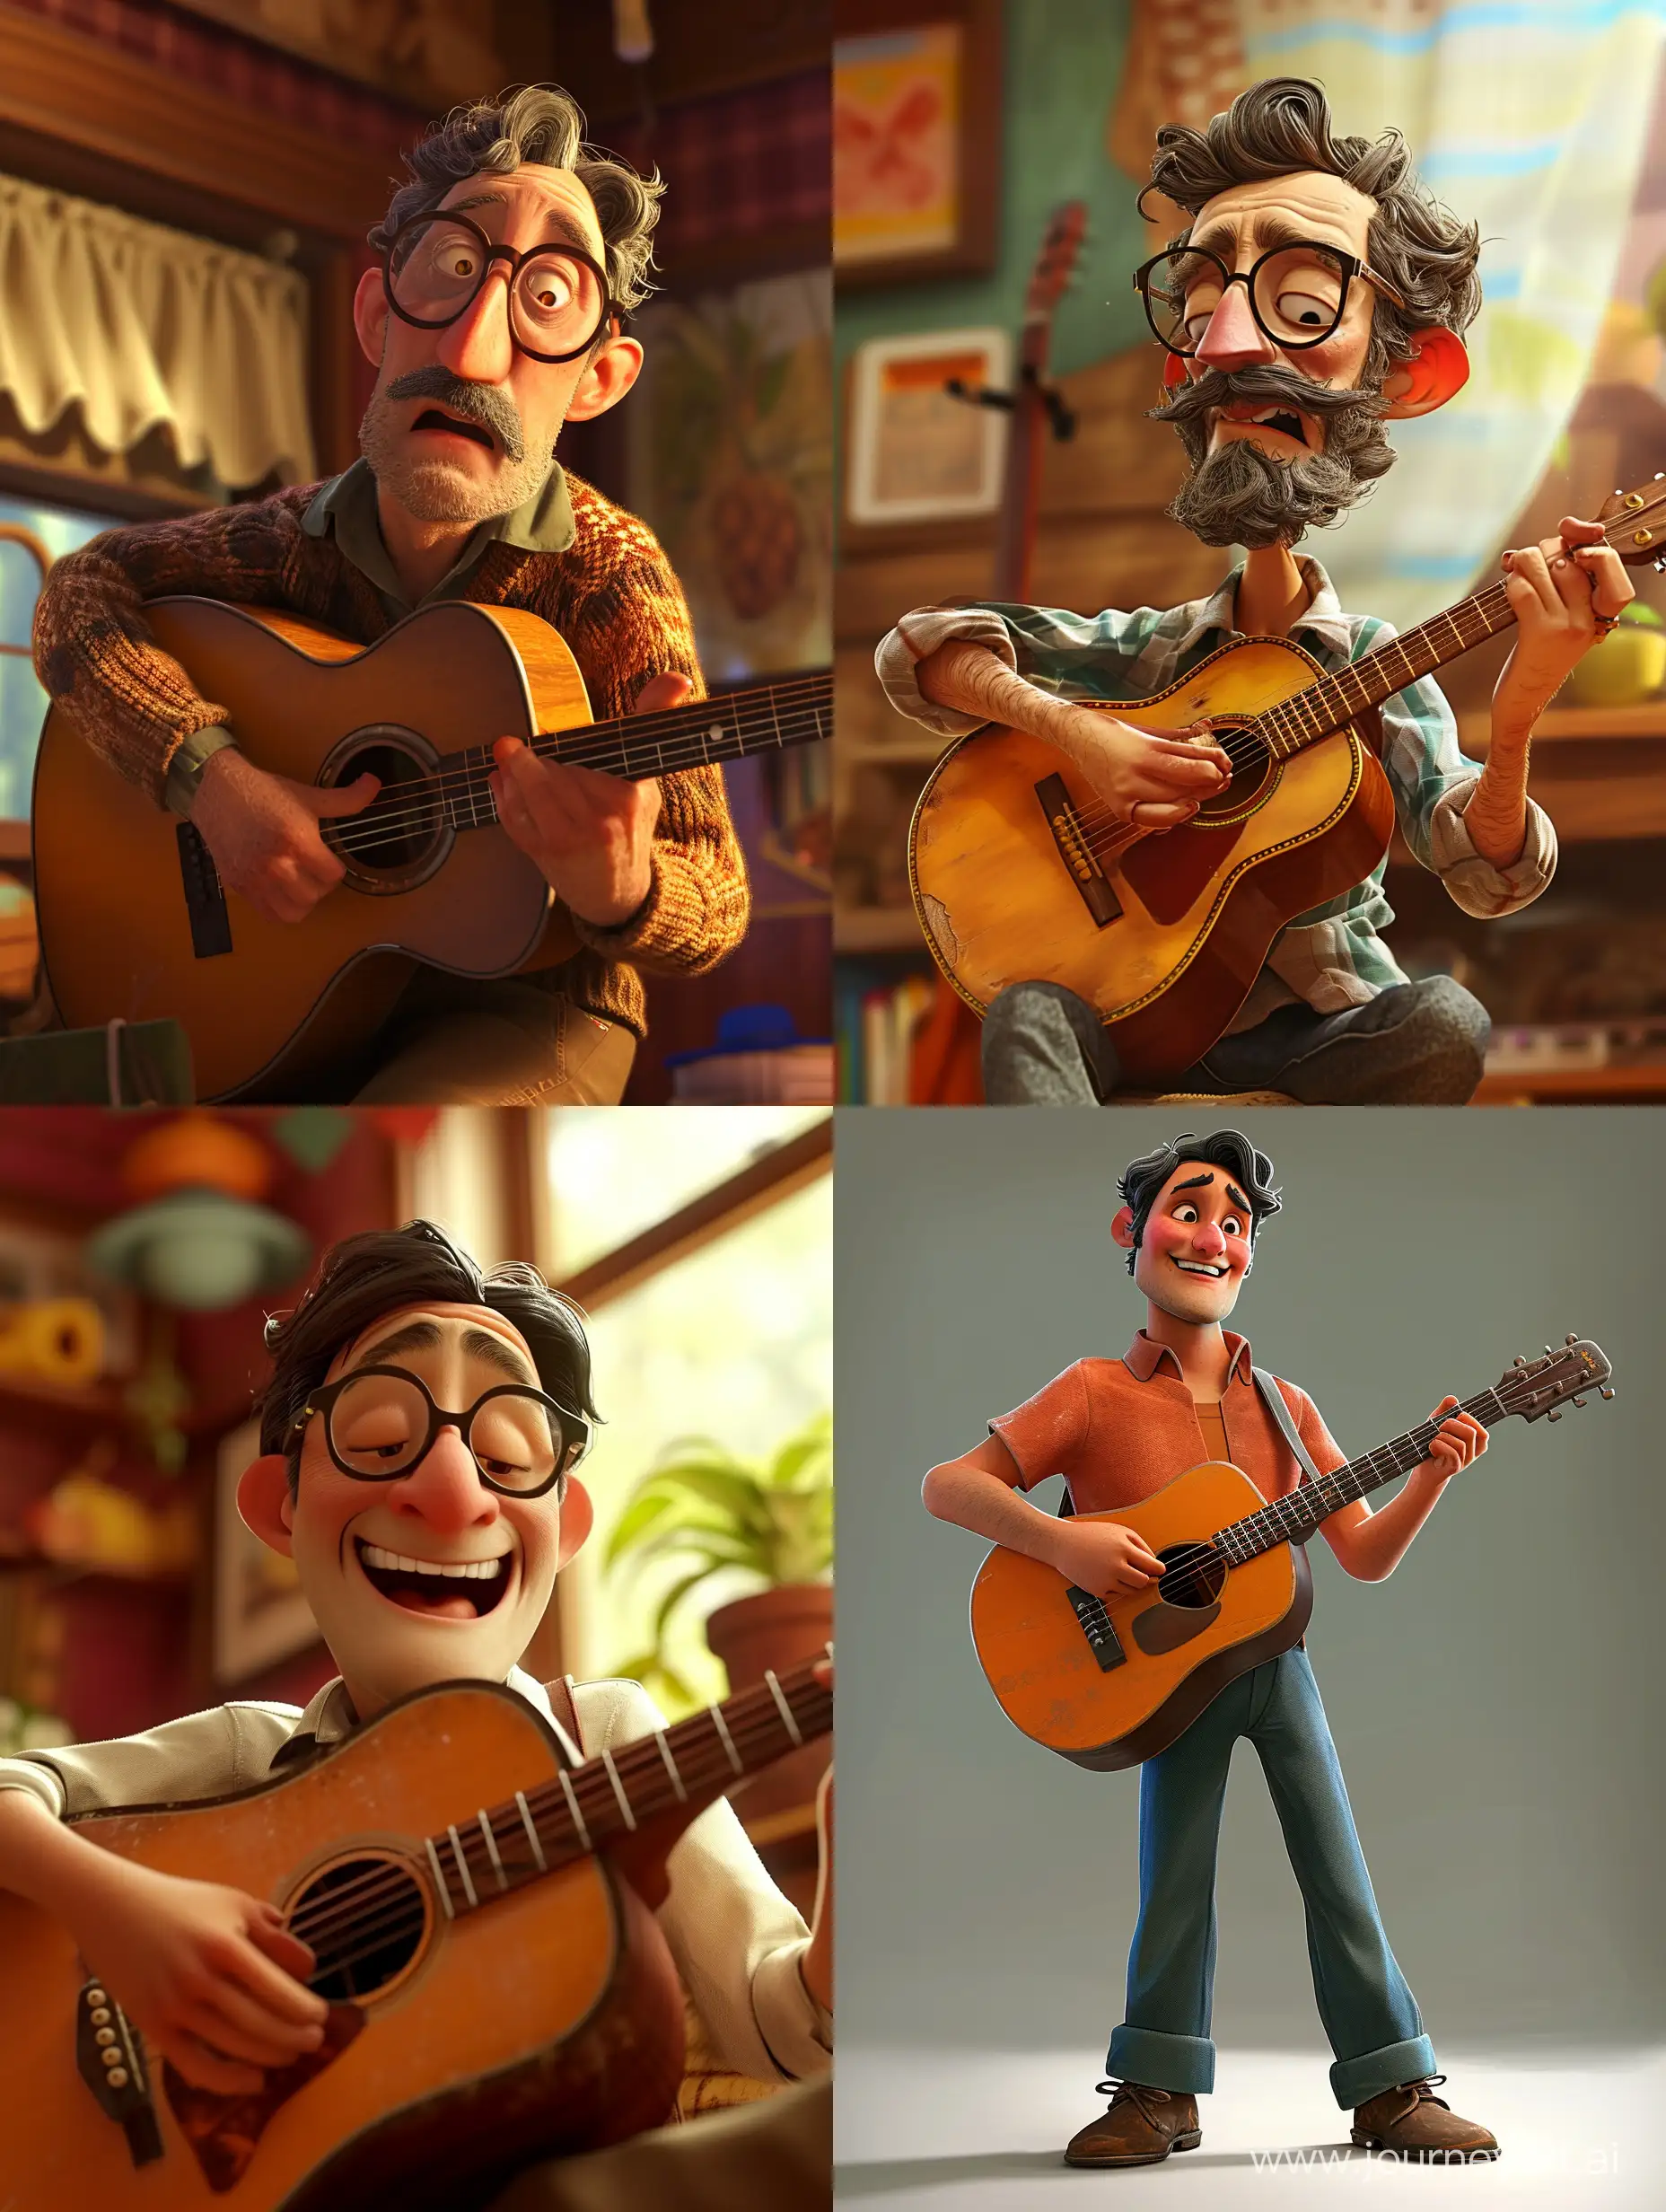 Master acoustic guitar player, pixar animation style.